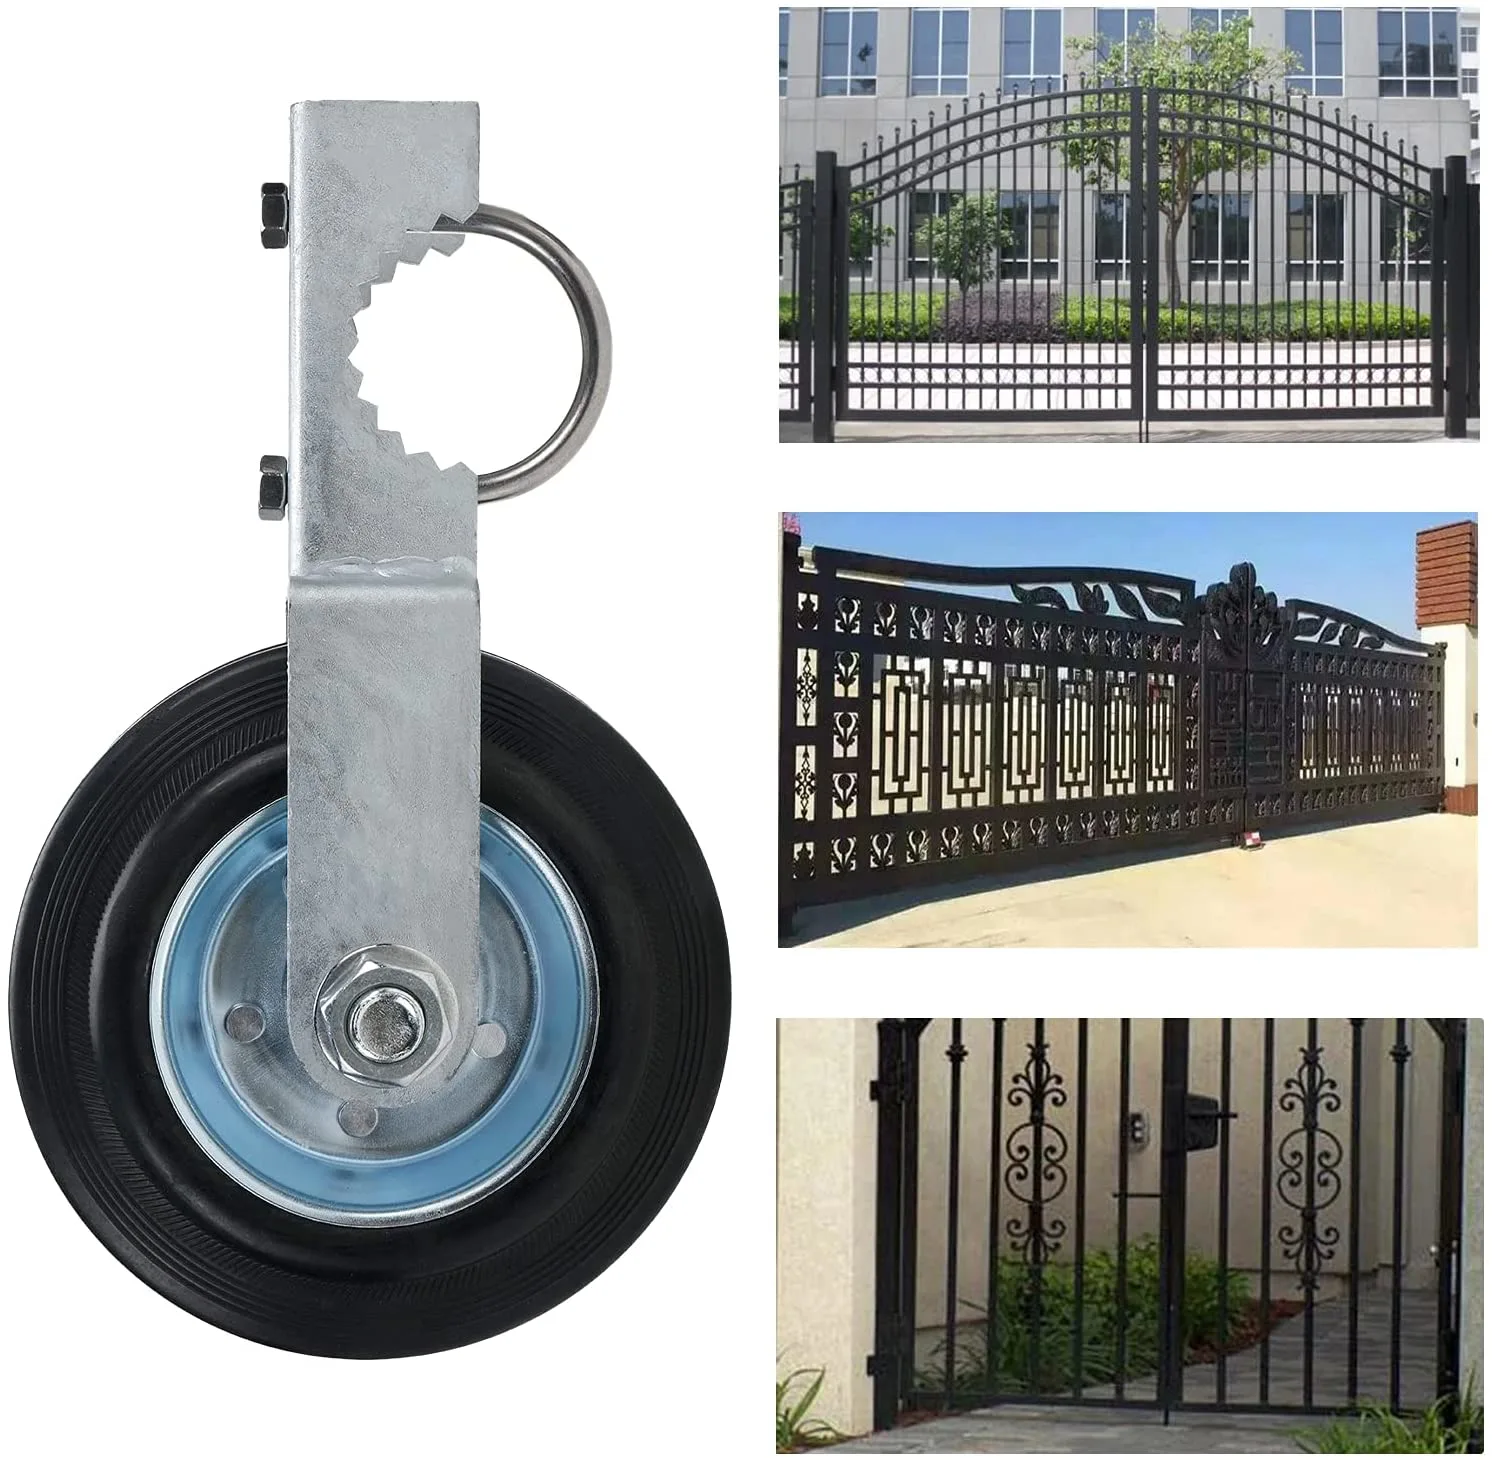 Heavy Duty Outdoor Gate Caster Wheels - Buy heavy duty gate caster wheel, fence caster wheels, outdoor gate caster Product on Surealong